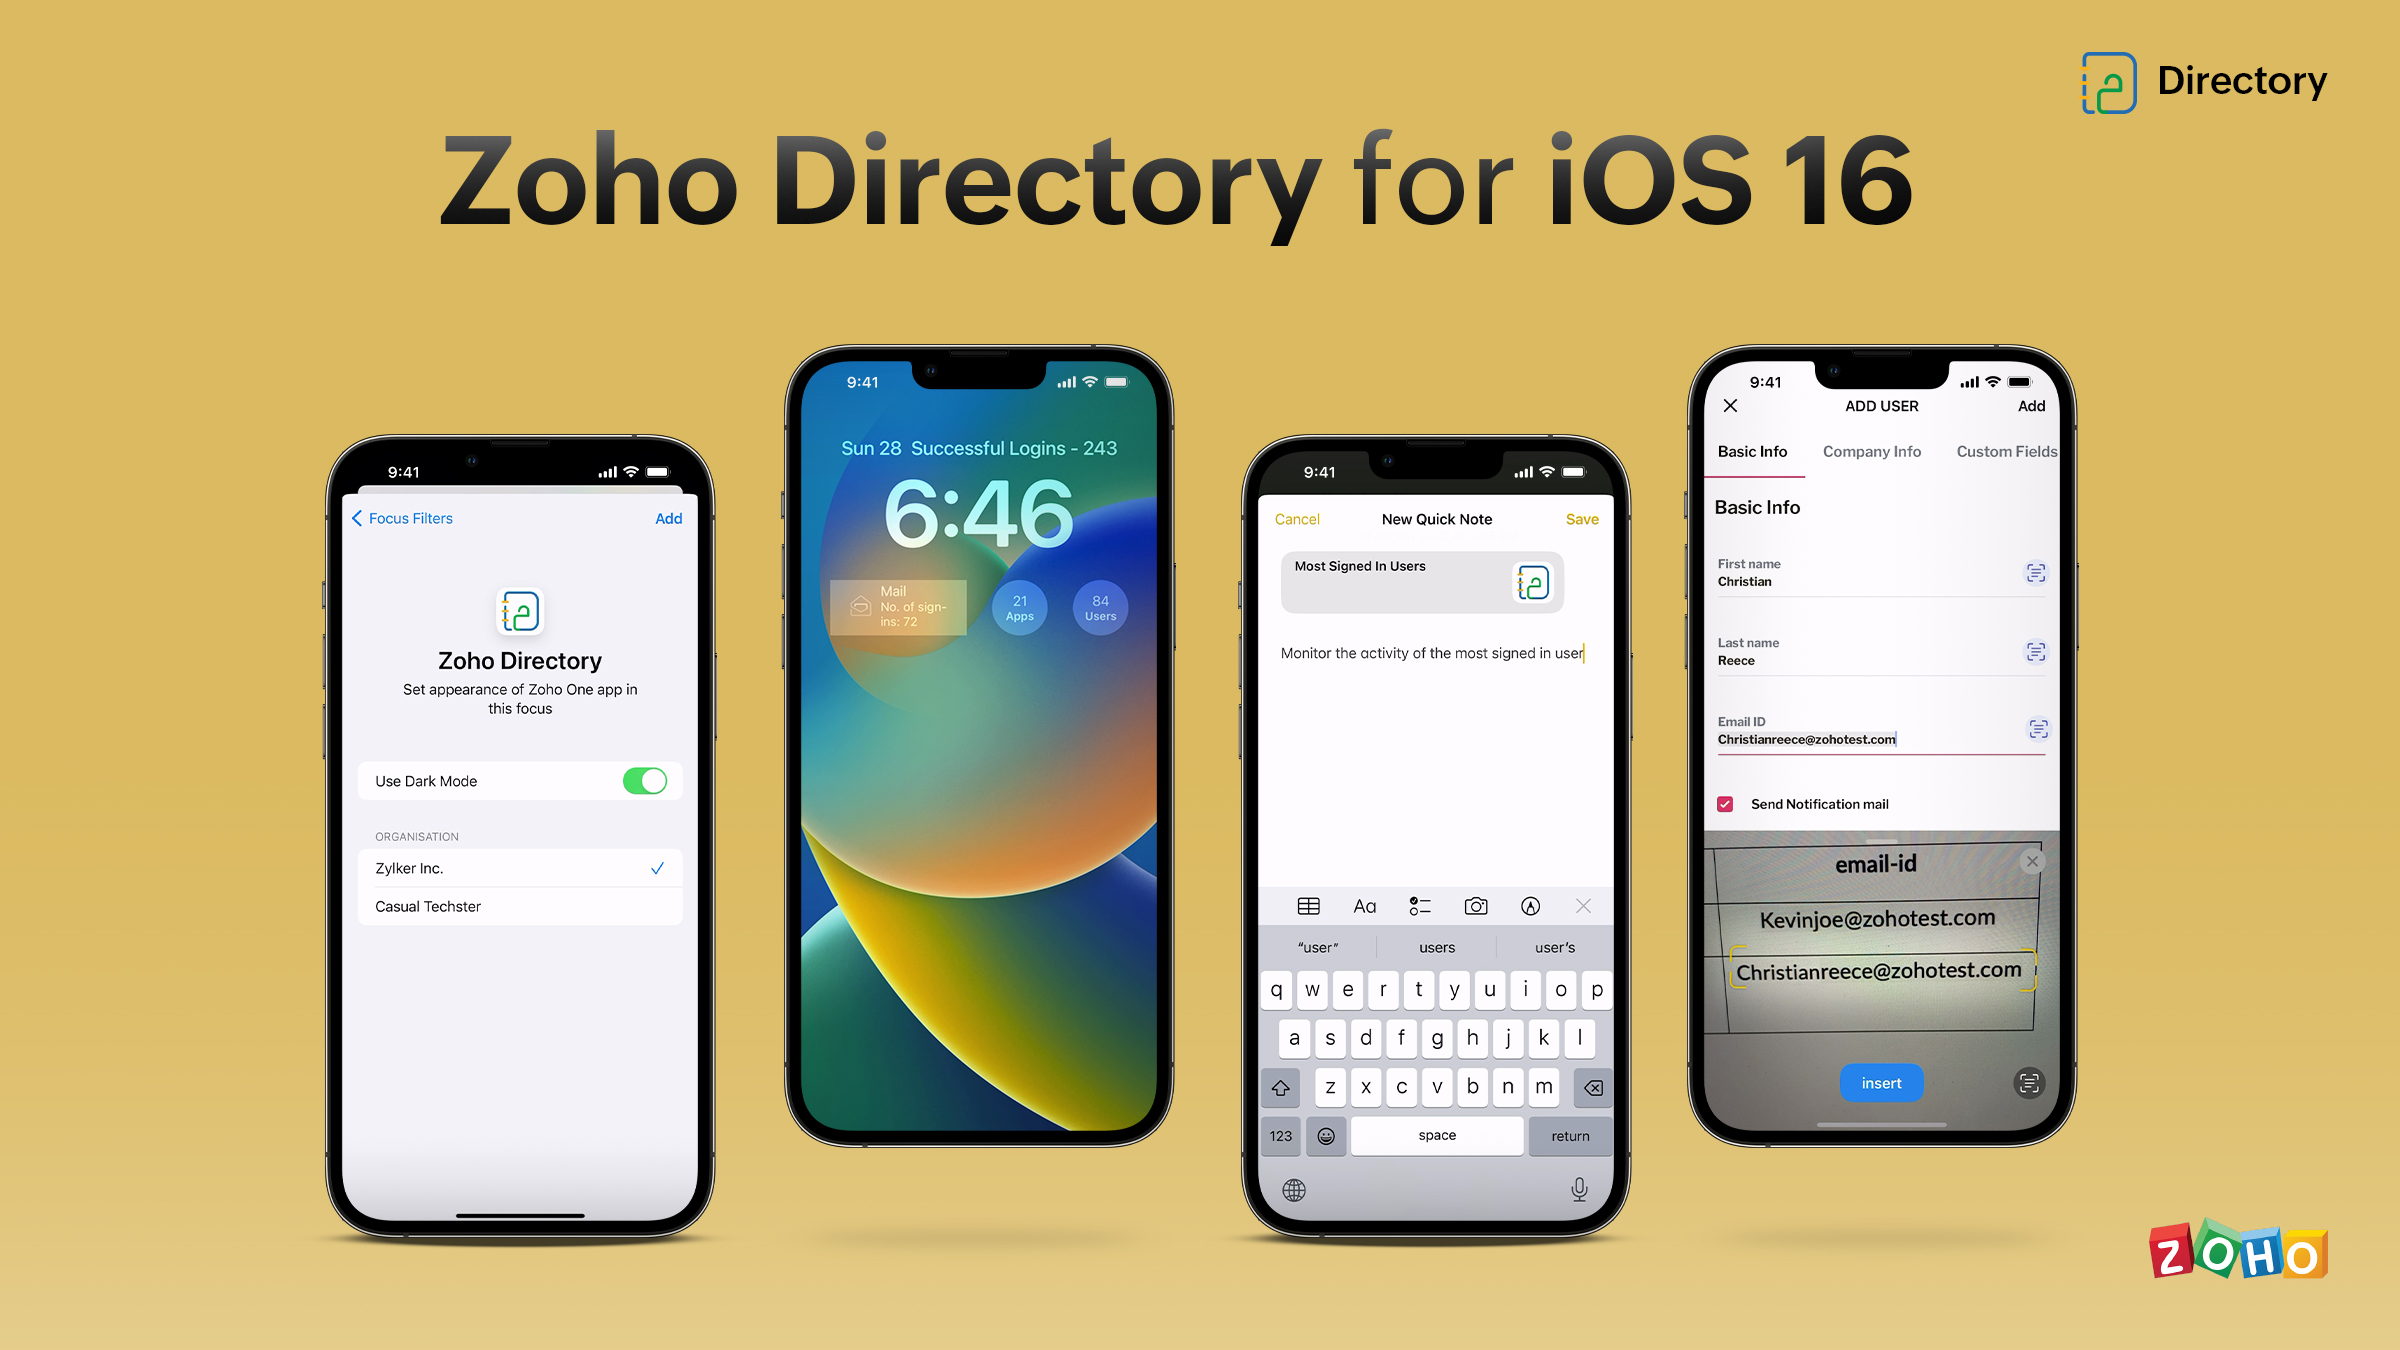 iOS 16: Zoho Directory’s all-new Focus filters, Lock Screen widgets, and more!